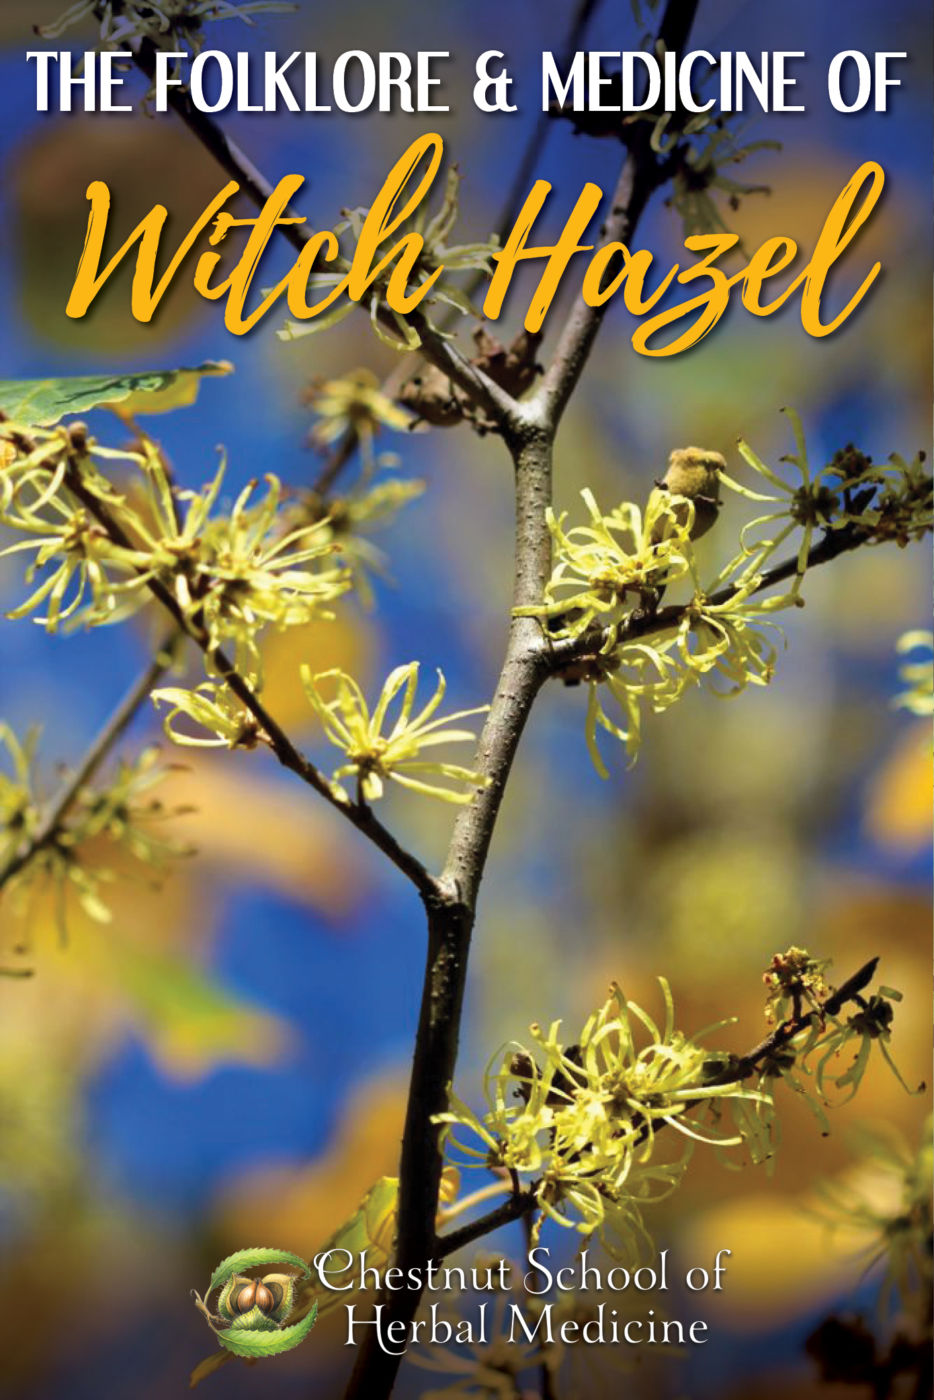 The folklore and medicine of witch hazel.